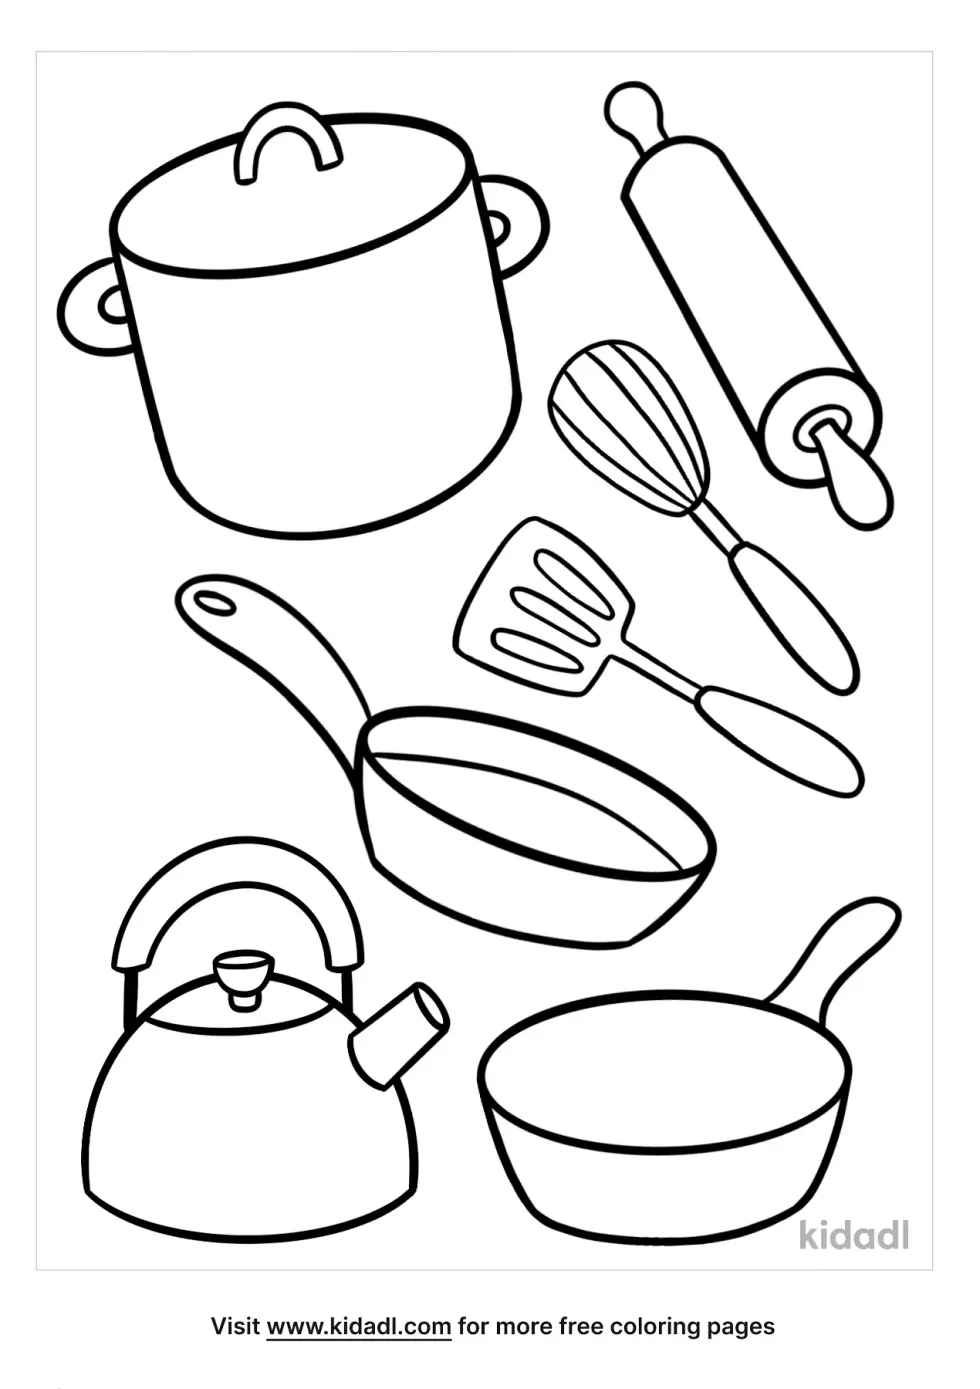 Cooking Utensils Coloring Page